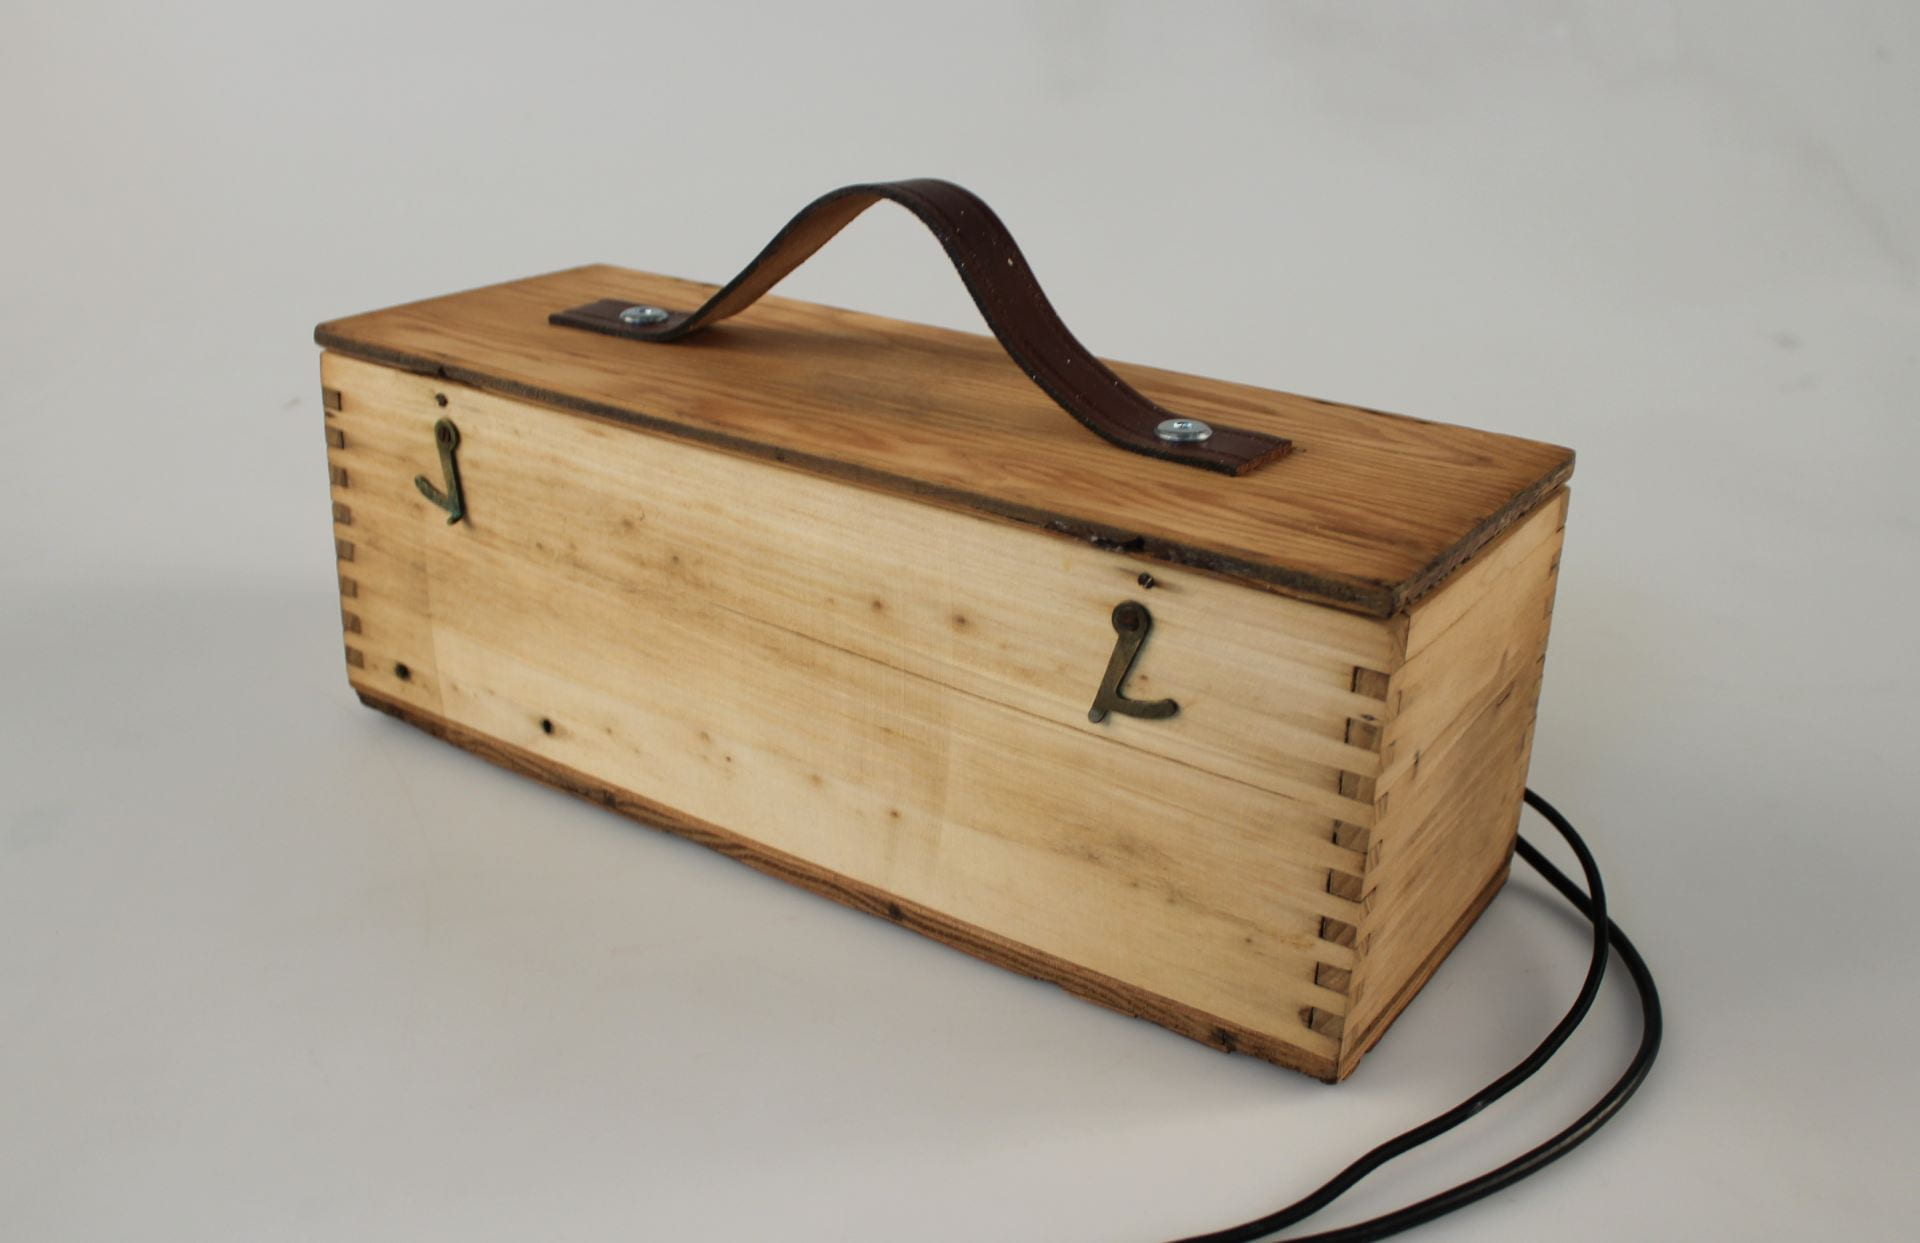 A rustic wooden box, with a leather strap on the lid, and wires at it's side.